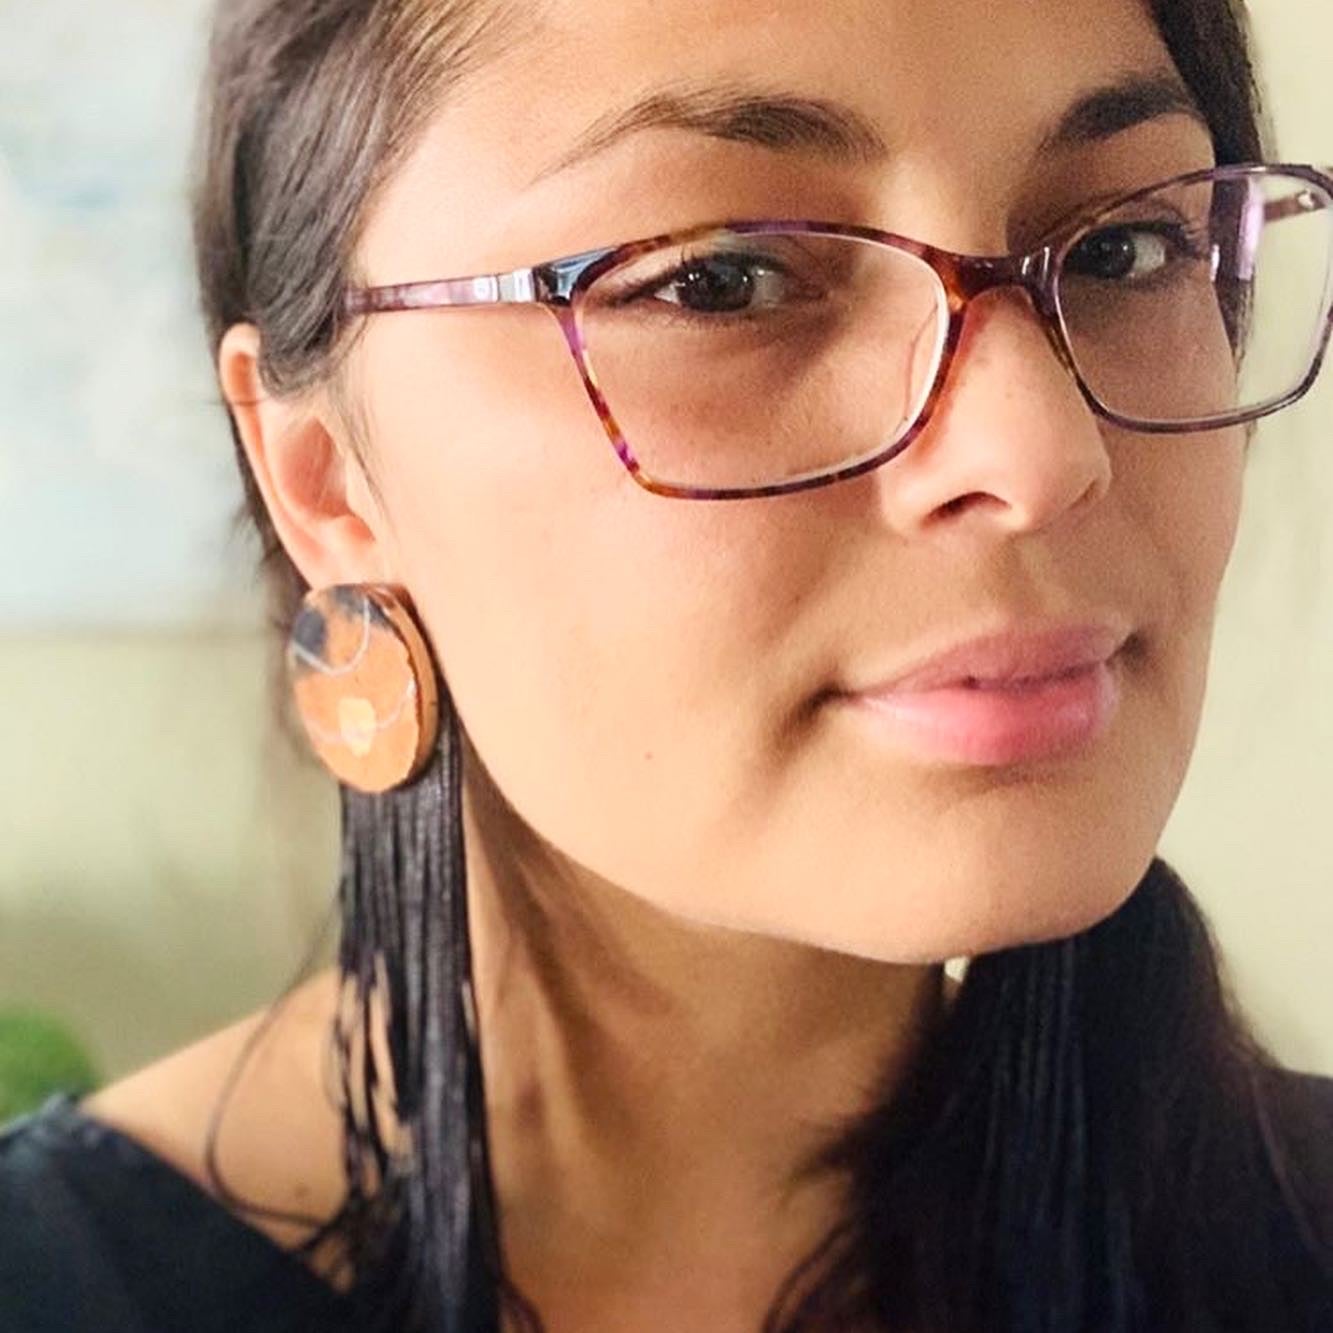 Model with glasses wearing a pair of black and brown fringe earrings.